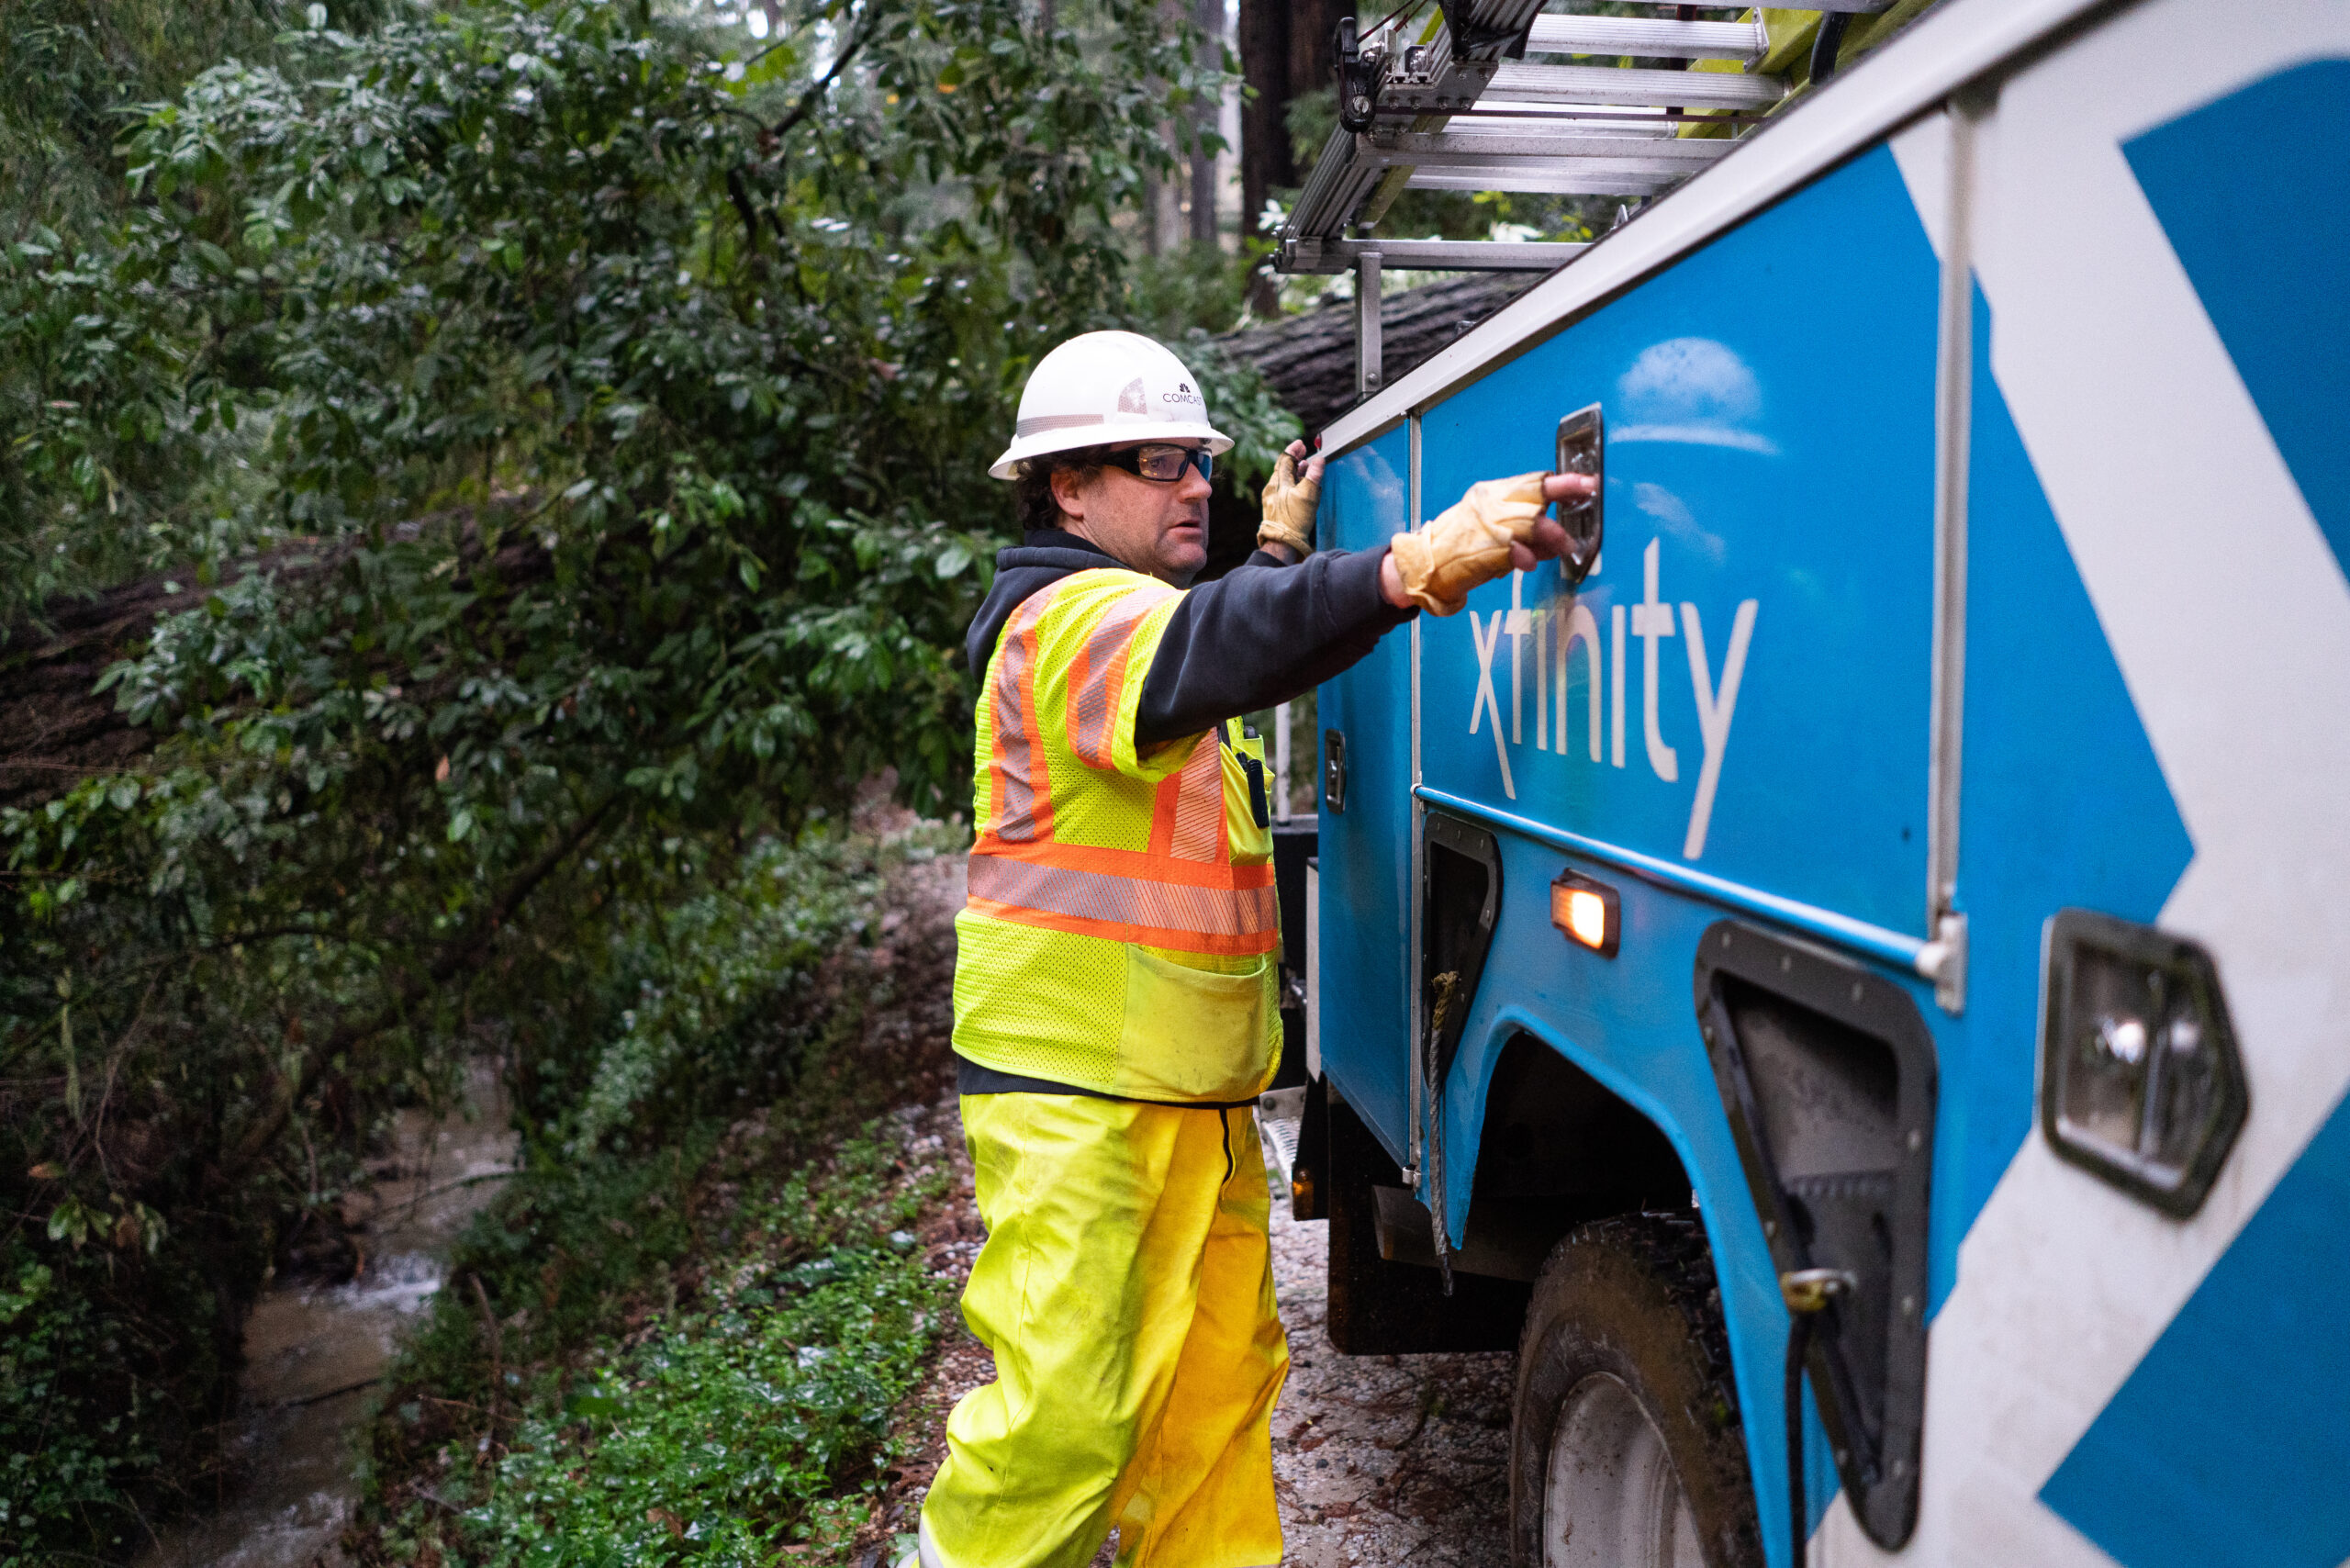 Comcast Opens Free Xfinity WiFi Hotspots to Support Residents During Storms